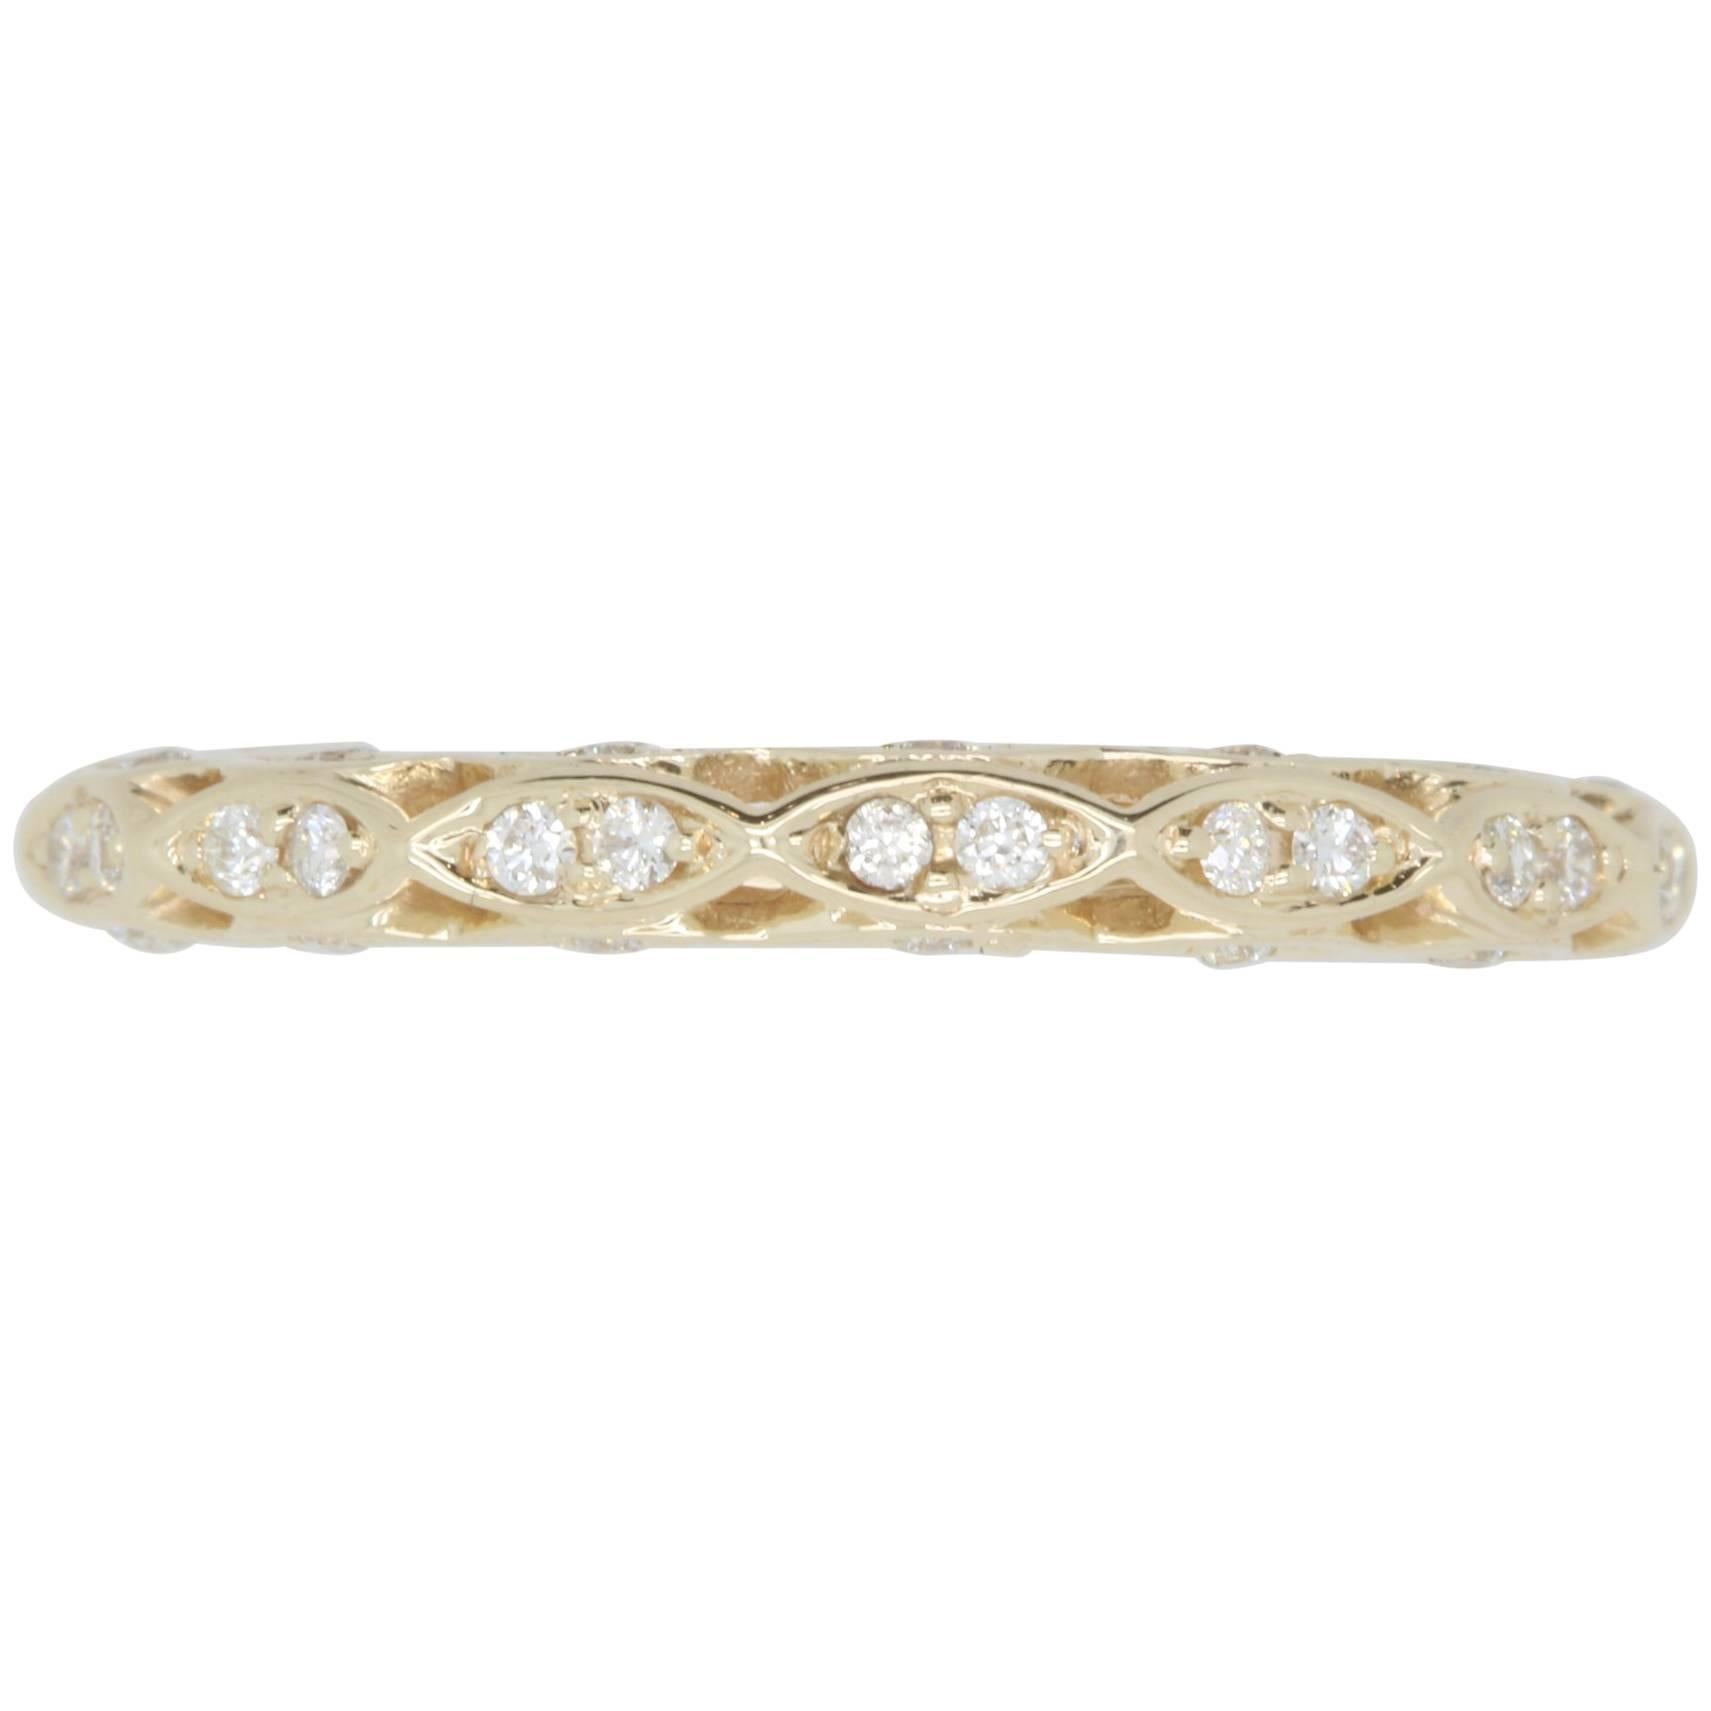 Material: 14k Yellow Gold 
Stone Details: 0.16 Carats of White Diamonds. Clarity: SI1-SI2 / Color: H-I
Ring Size: Size 7 (can be sized)

Fine one-of-a kind craftsmanship meets incredible quality in this breathtaking piece of jewelry.

All Alberto